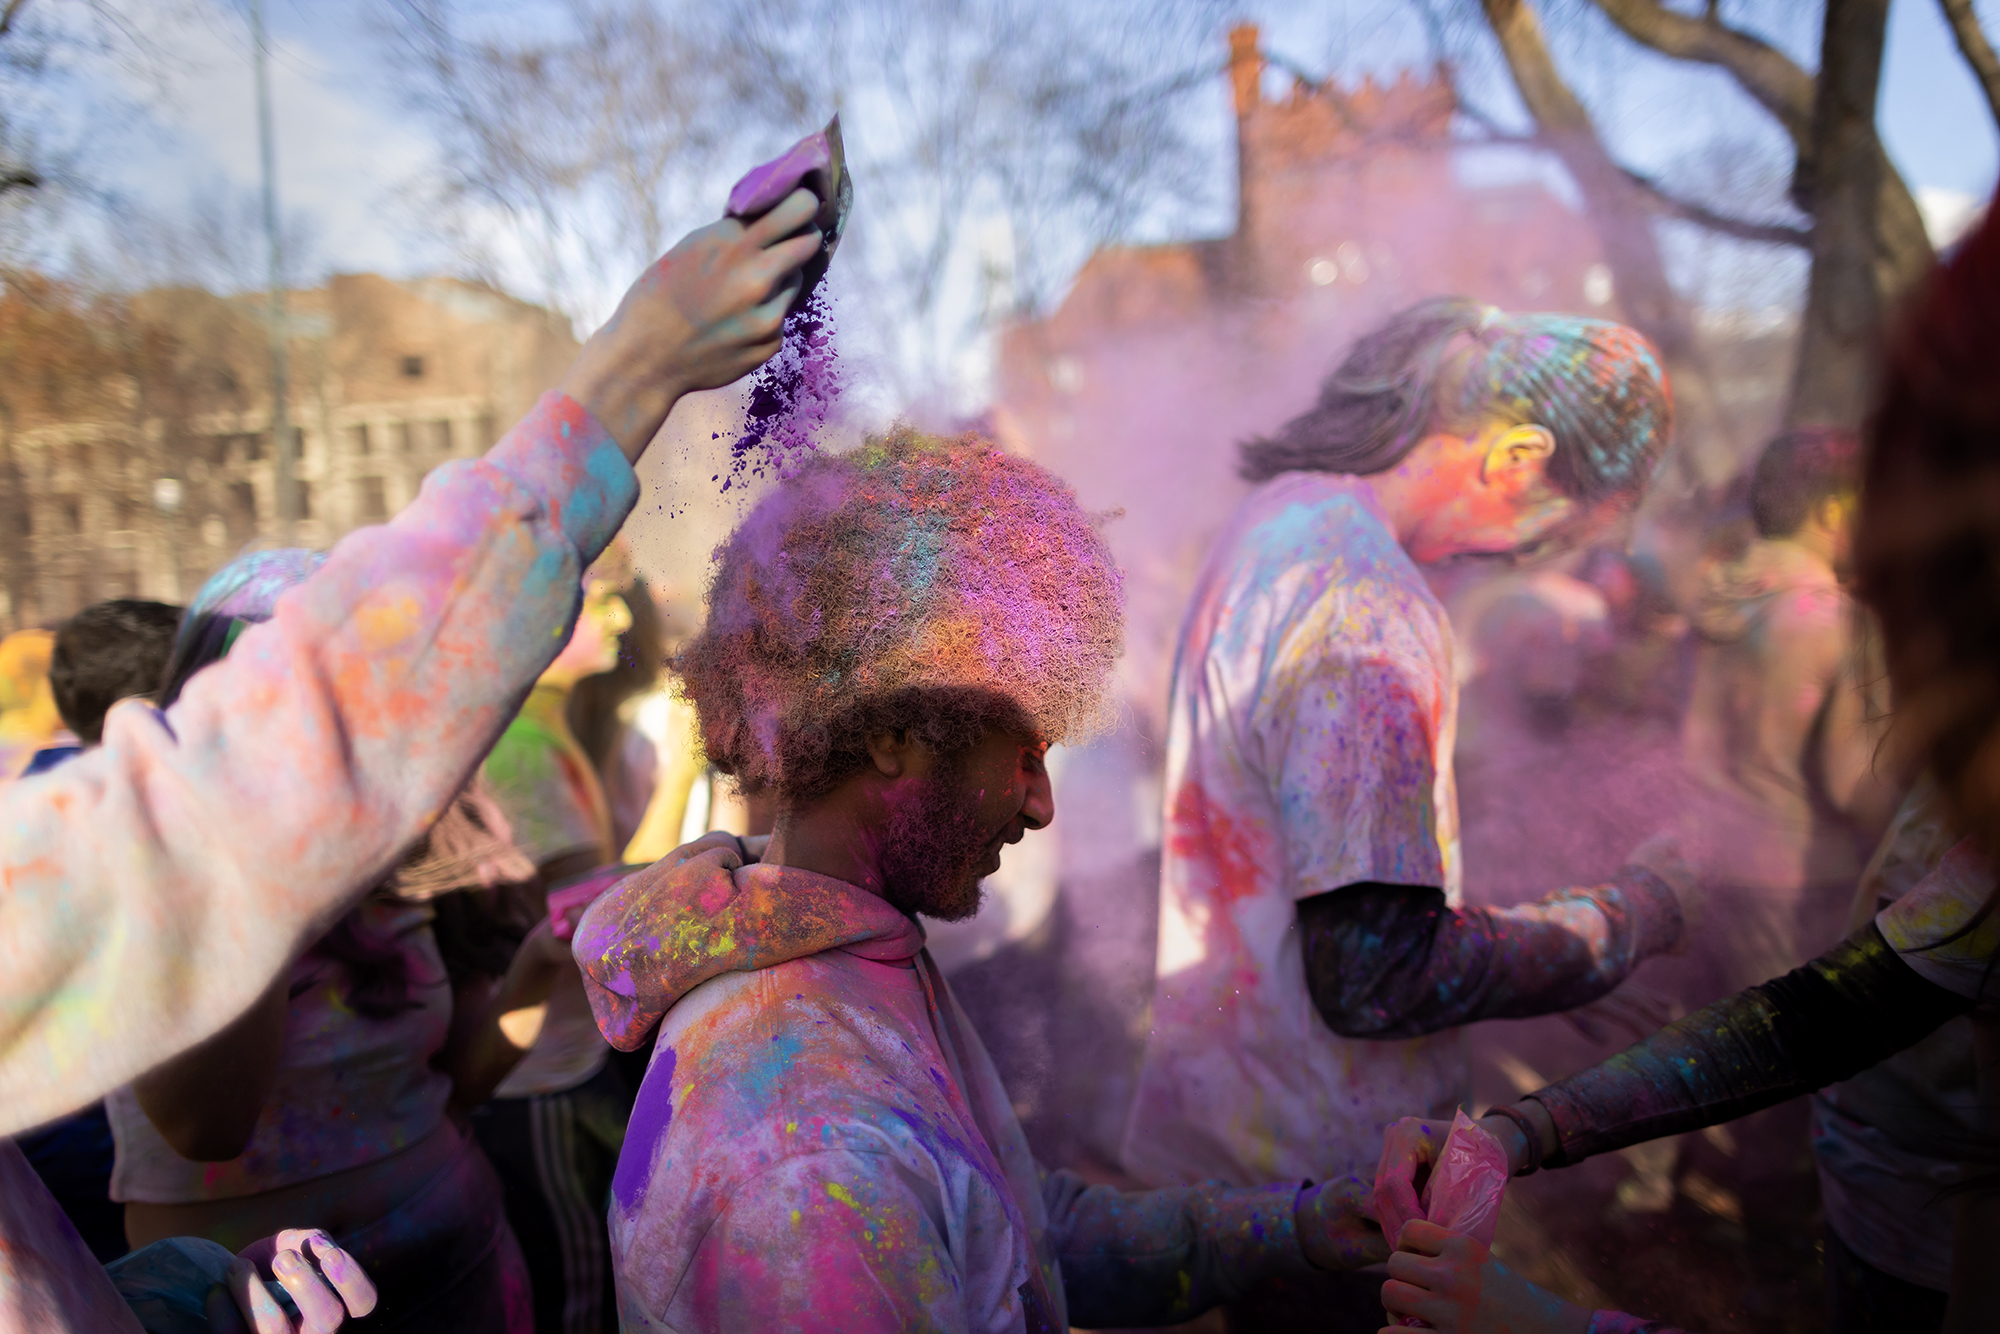 A Penn student pours powder onto the hair of another Penn student during the Holi celebration.